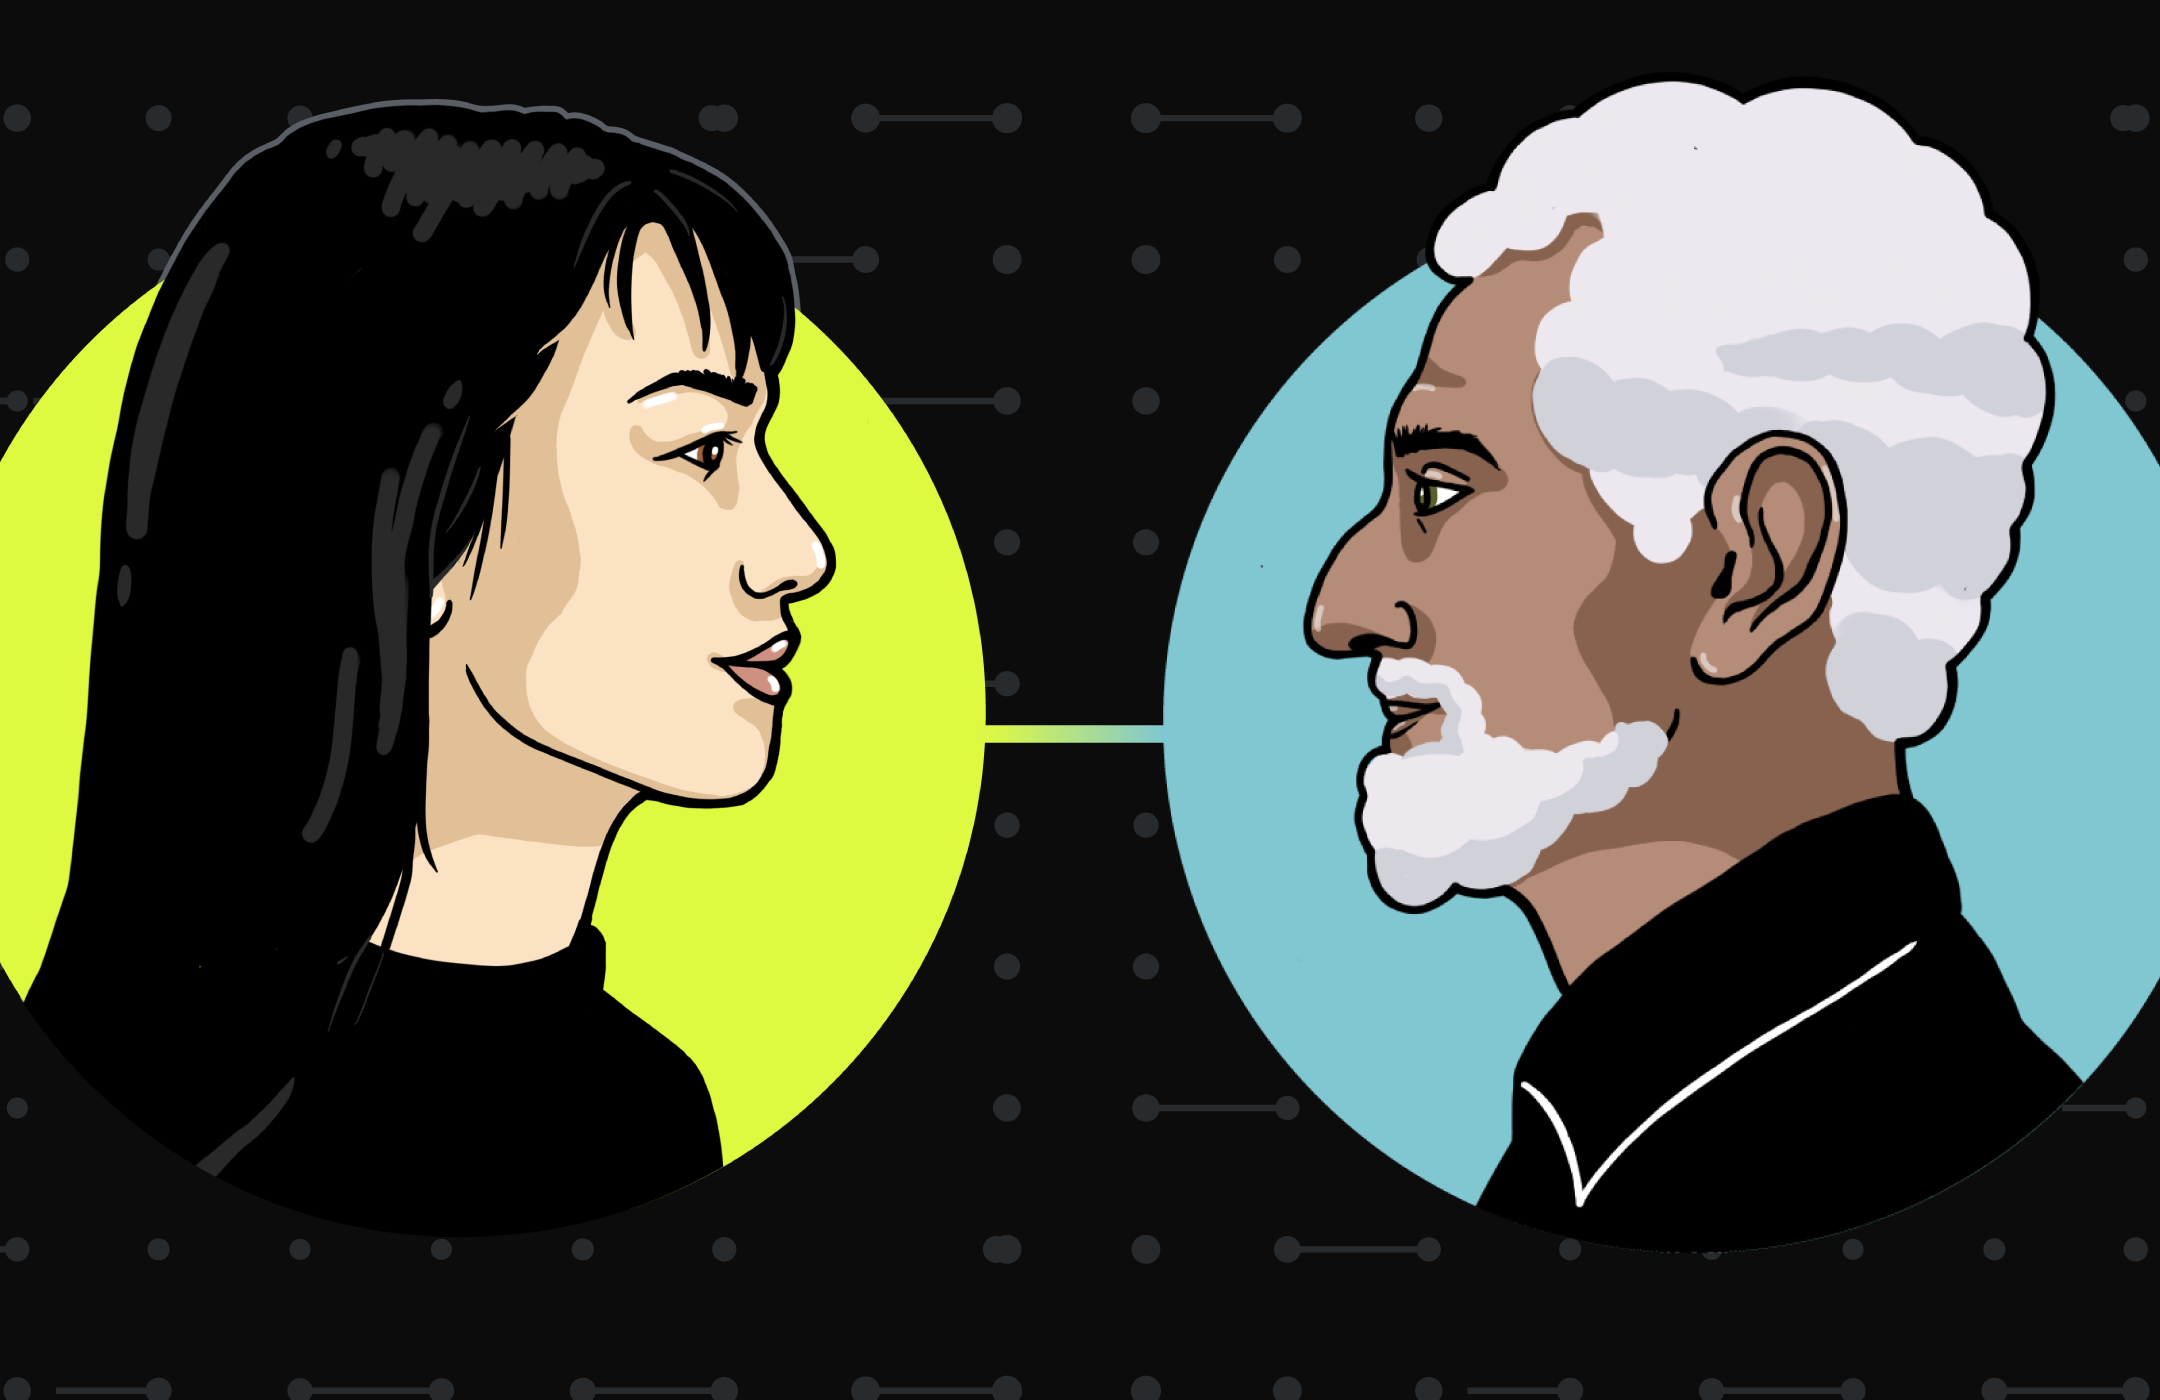 Graphic of woman with dark hair facing man with gray hair